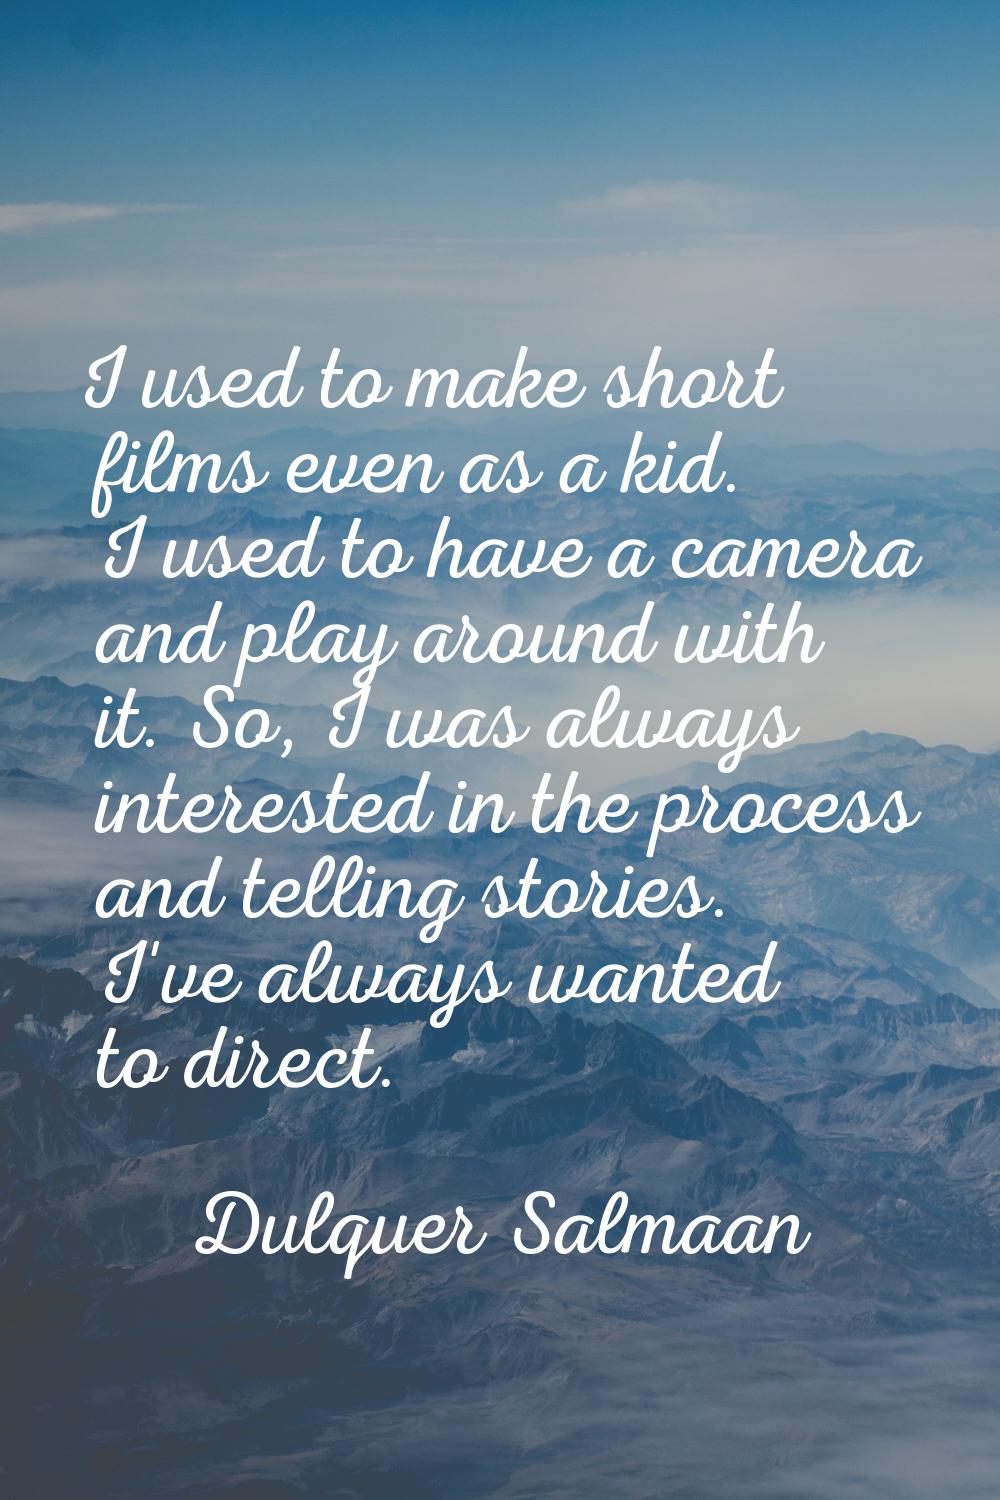 I used to make short films even as a kid. I used to have a camera and play around with it. So, I wa